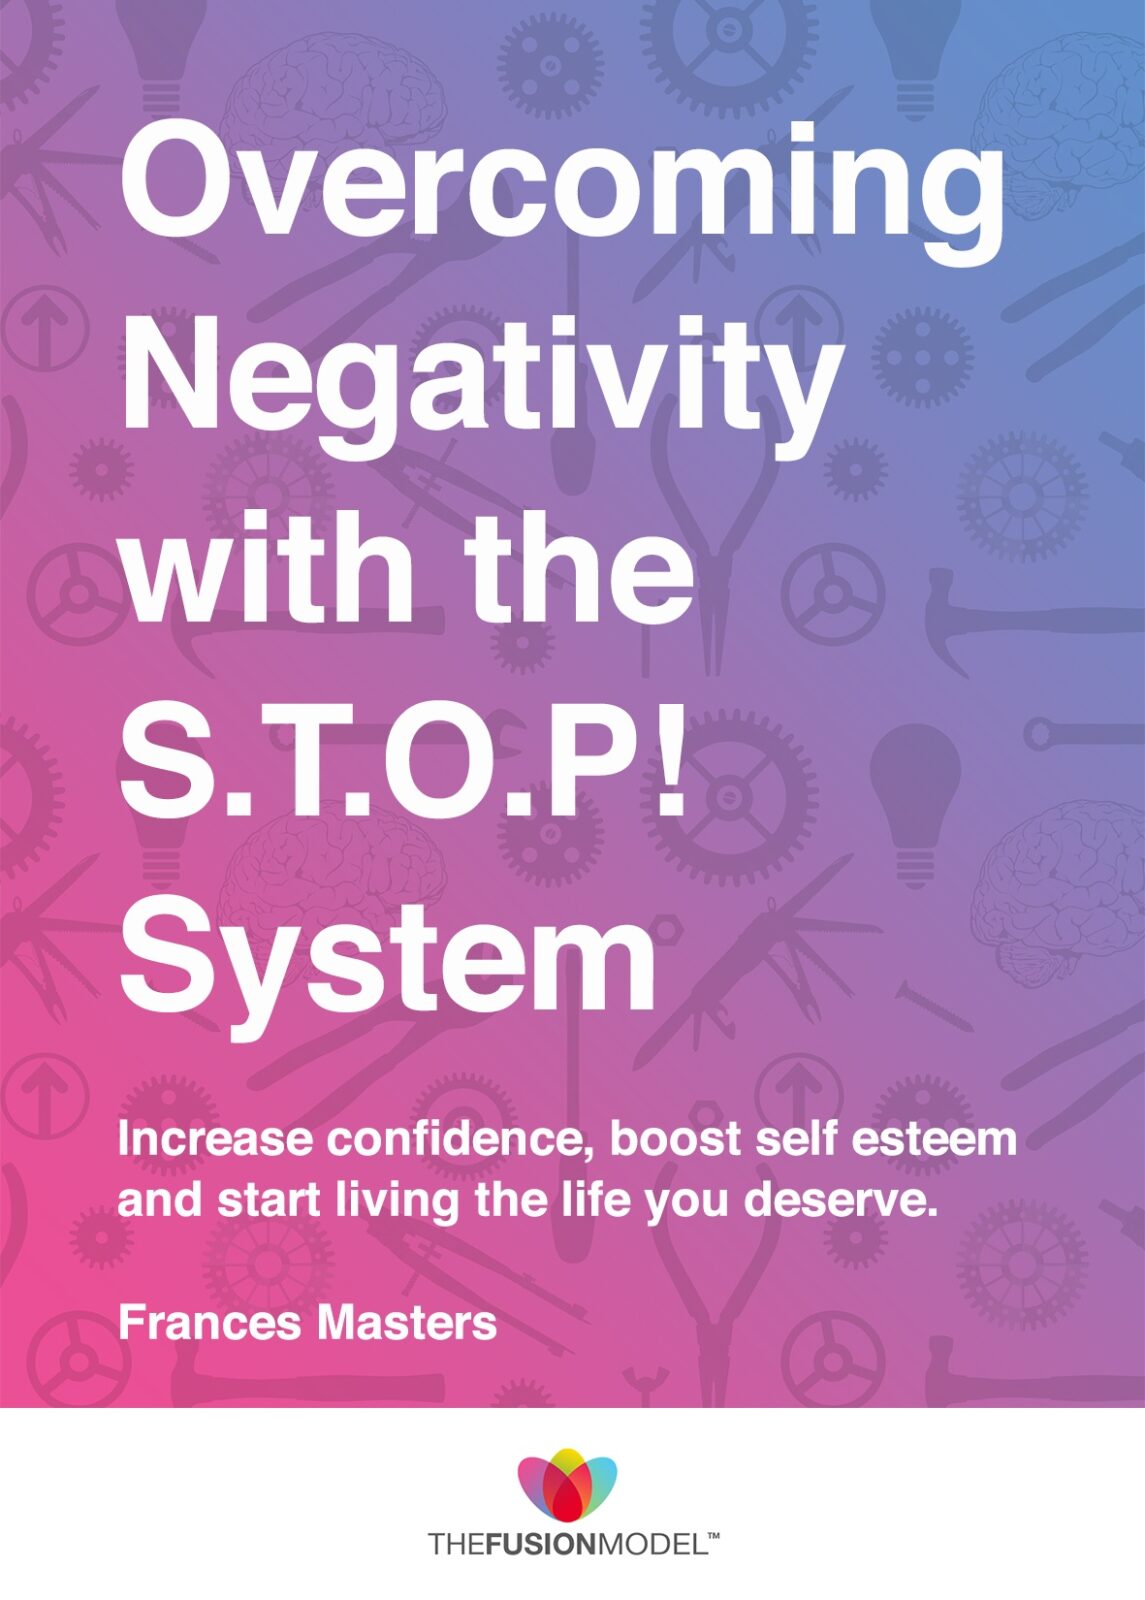 Overcoming Negativity with the S.T.O.P! System